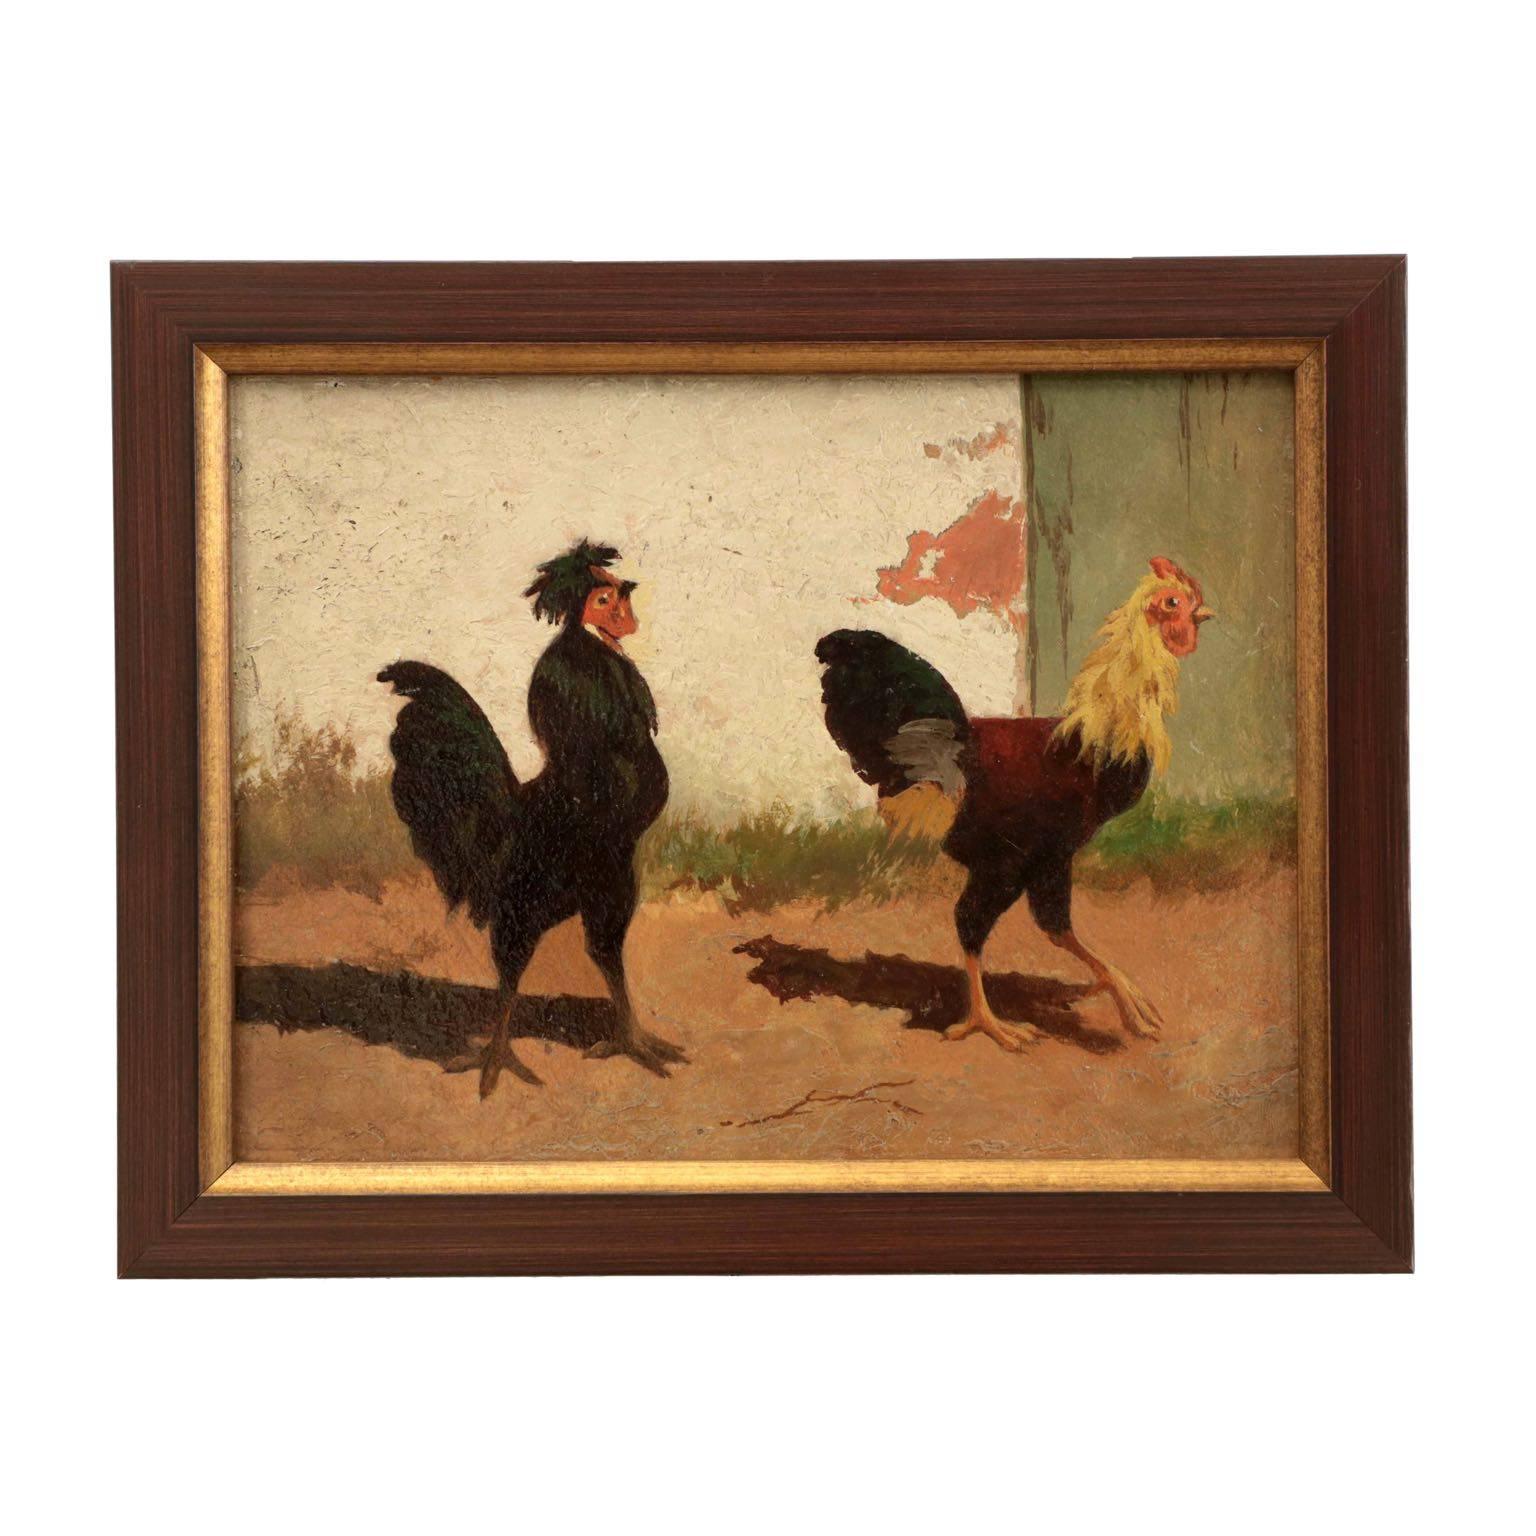 Hand-Painted Four William Baird American, 1847-1899 Paintings of Cocks Fighting